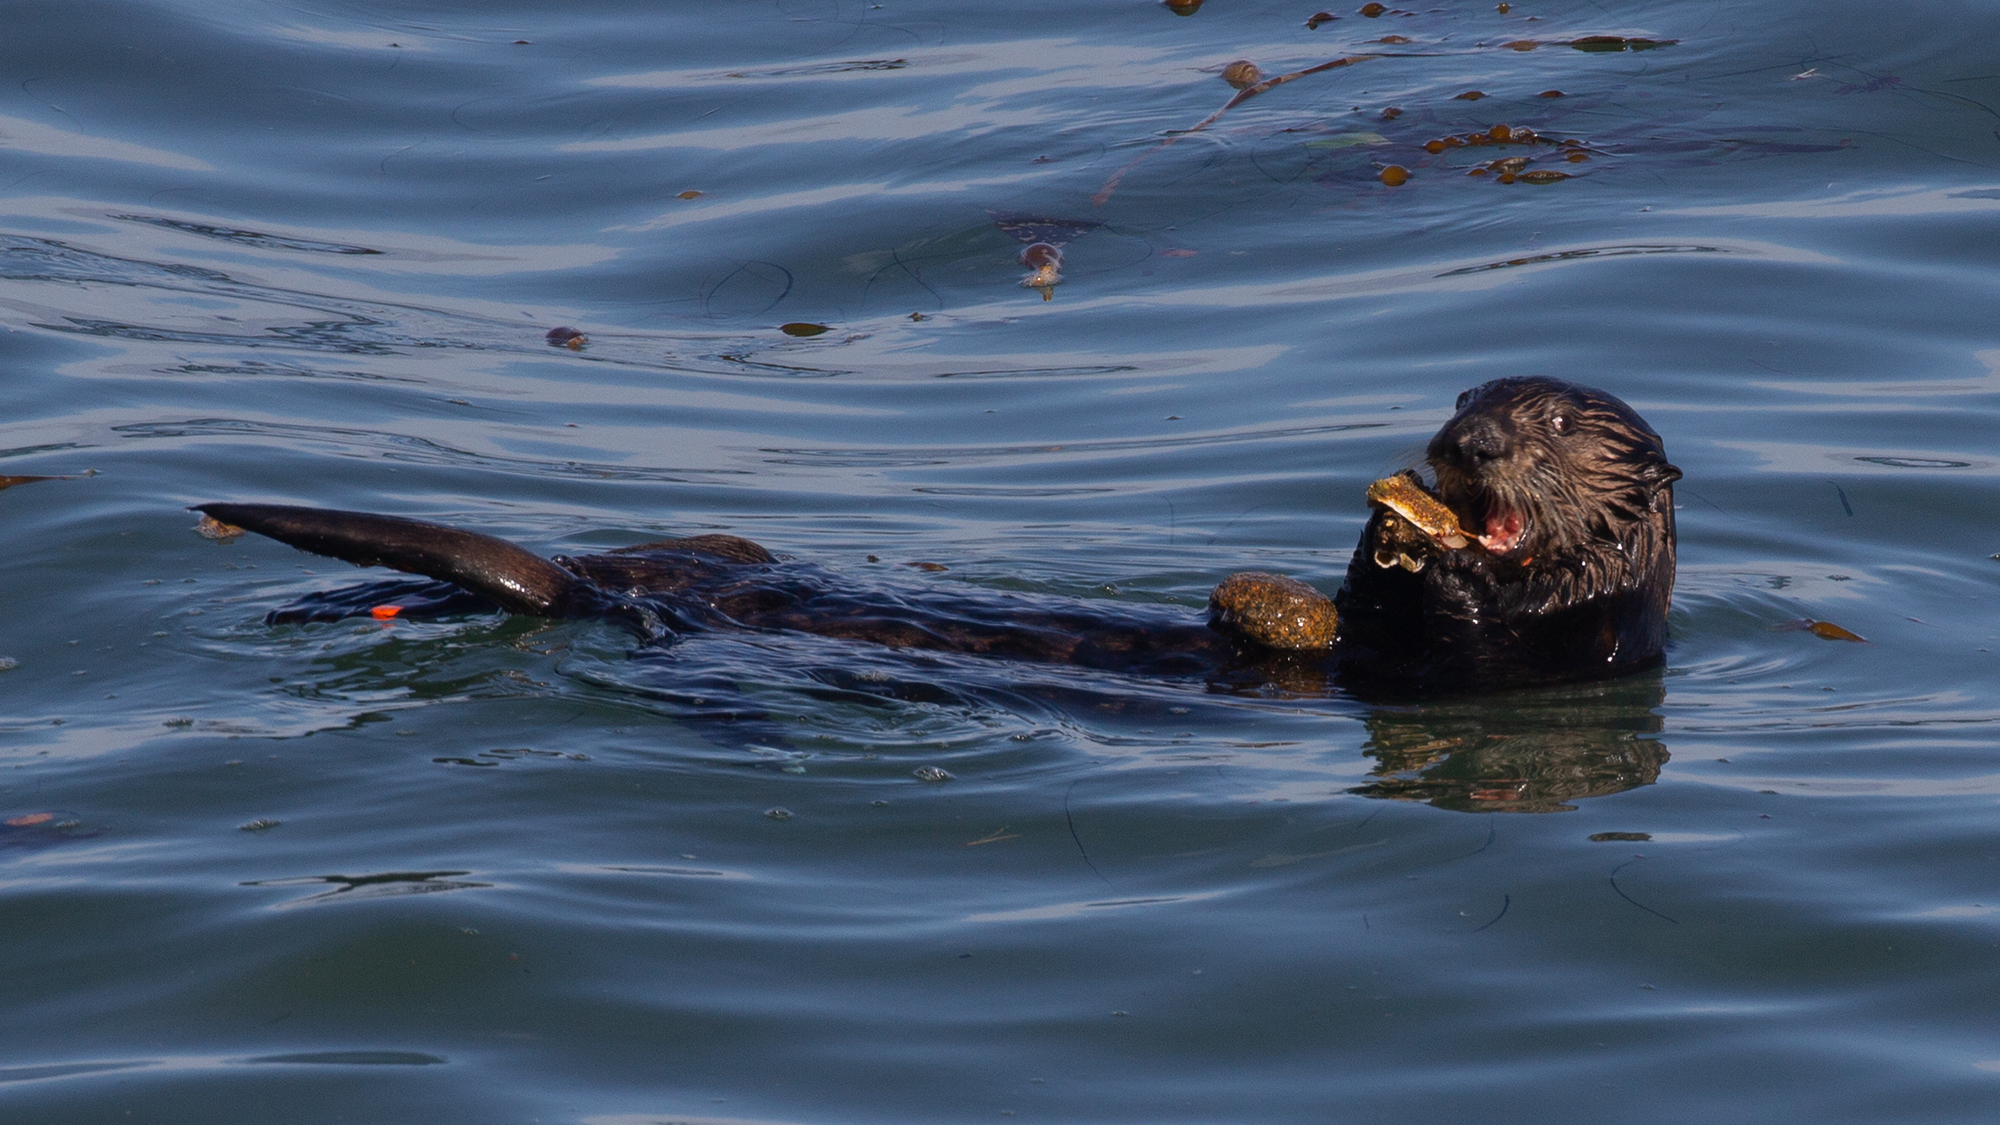 Female sea otters use tools more than males